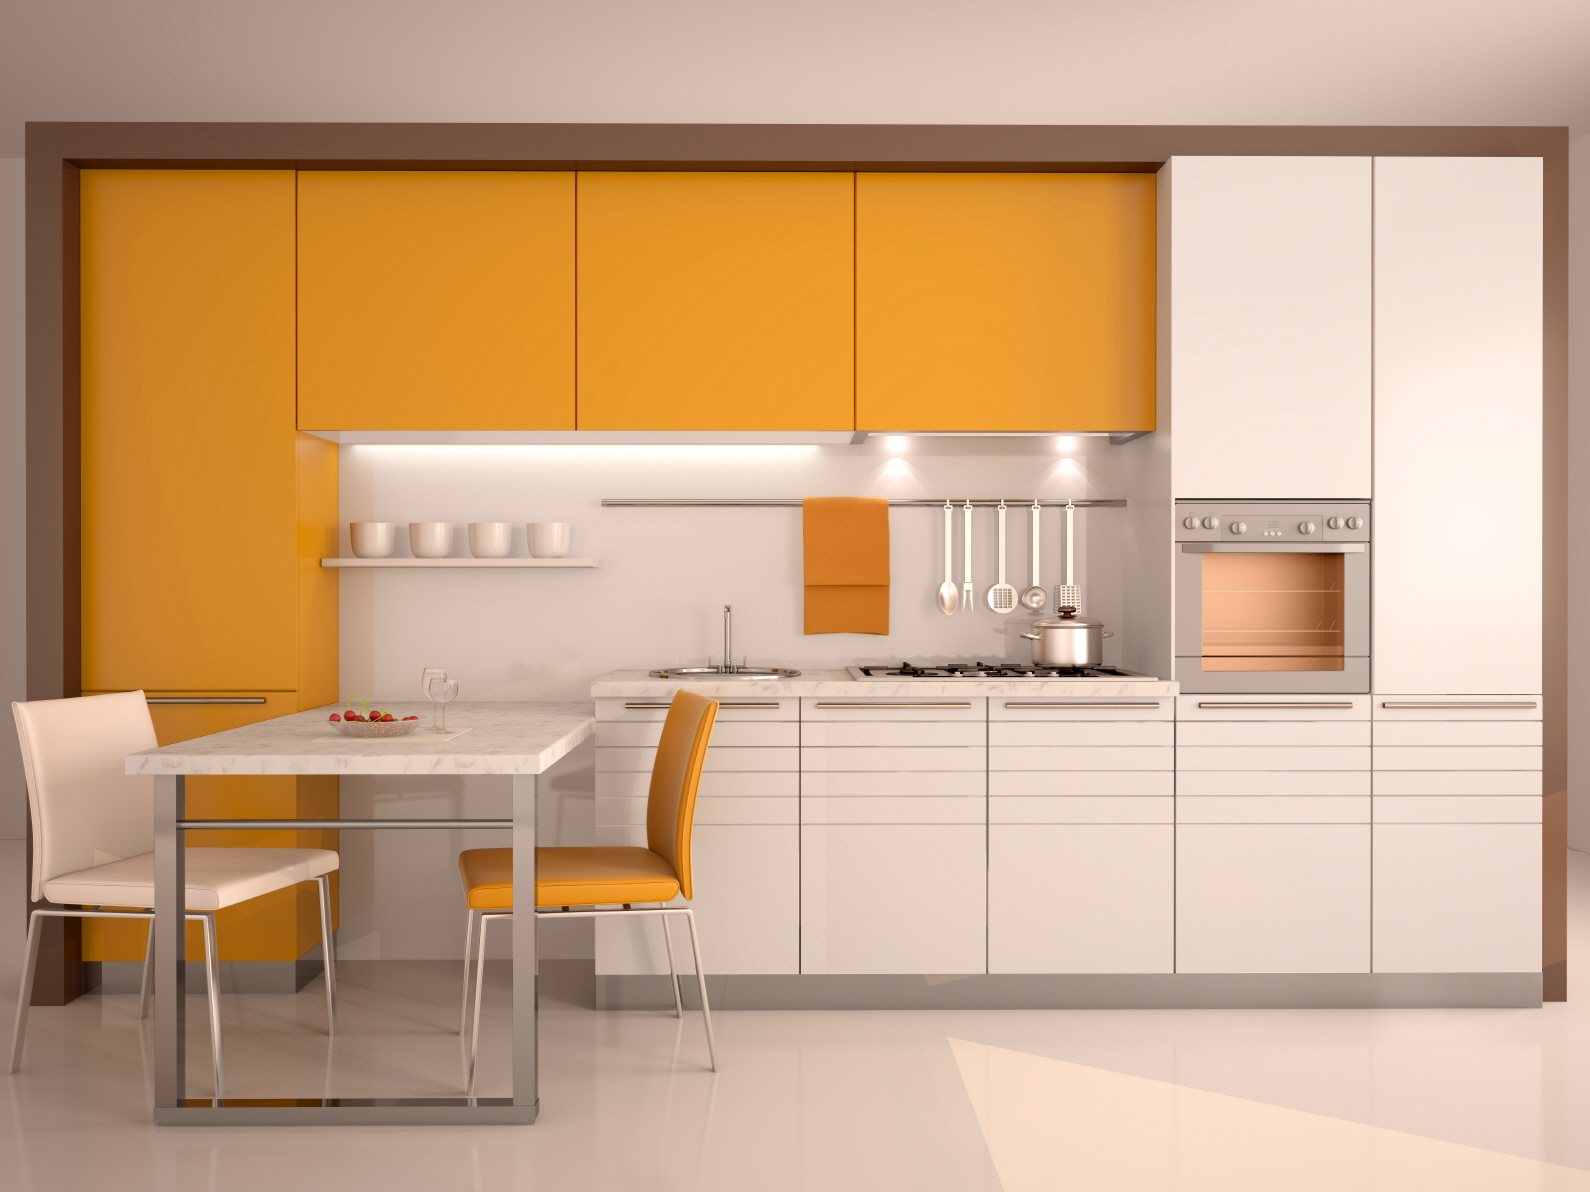 Try bold color choices like vibrant accent walls, colorful cabinets, or daring accessories in your small kitchen for a high-impact, personality-filled look.